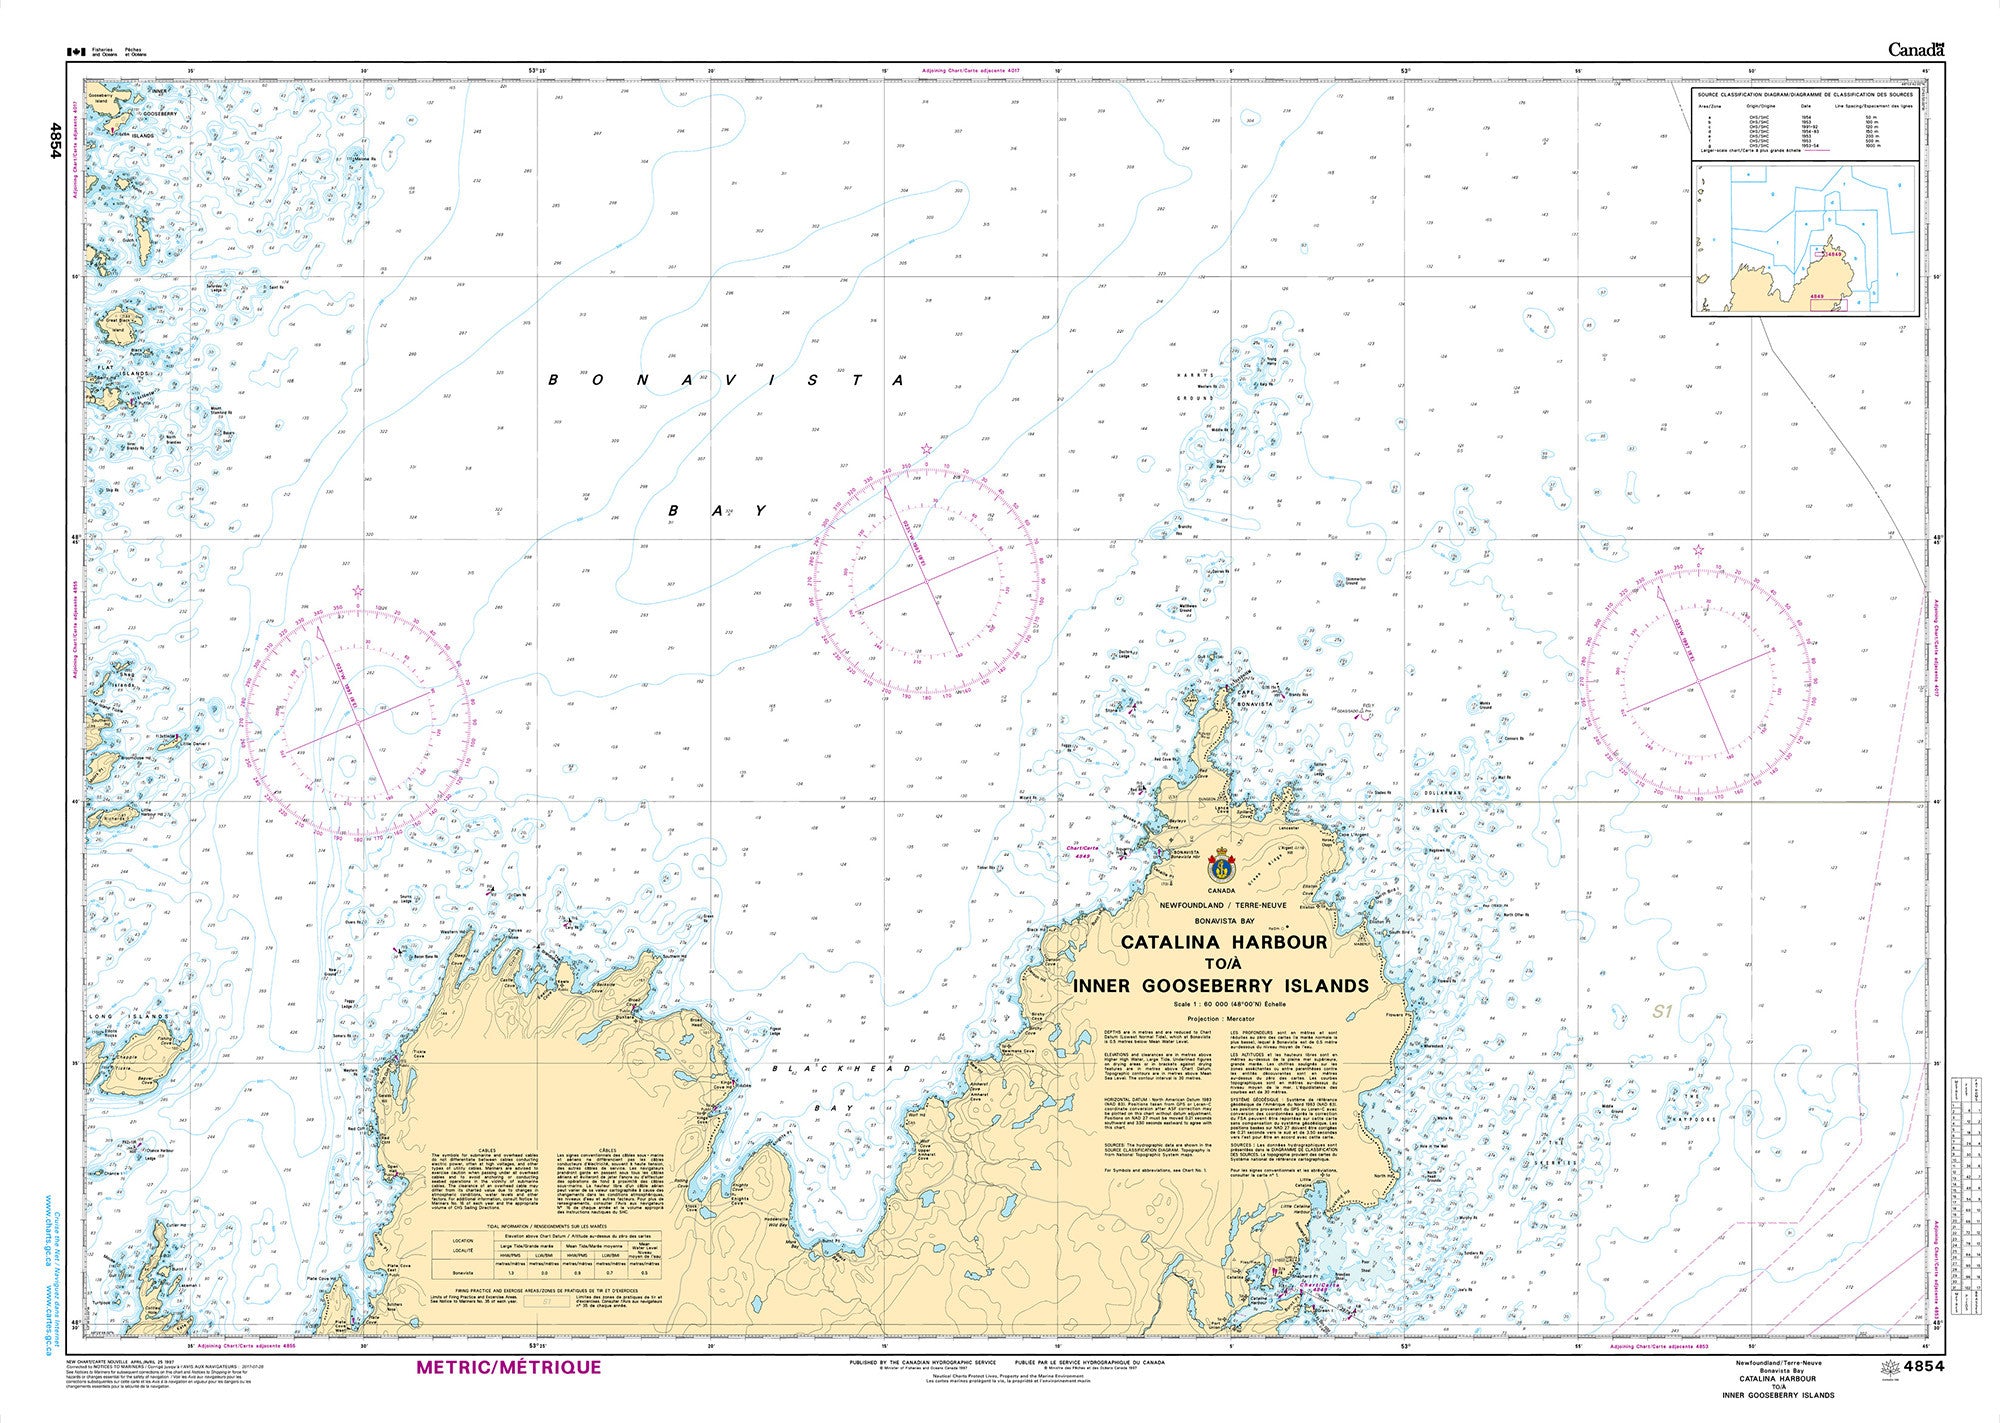 Canadian Hydrographic Service Nautical Chart CHS4854: Catalina Harbour to / à Inner Gooseberry Islands